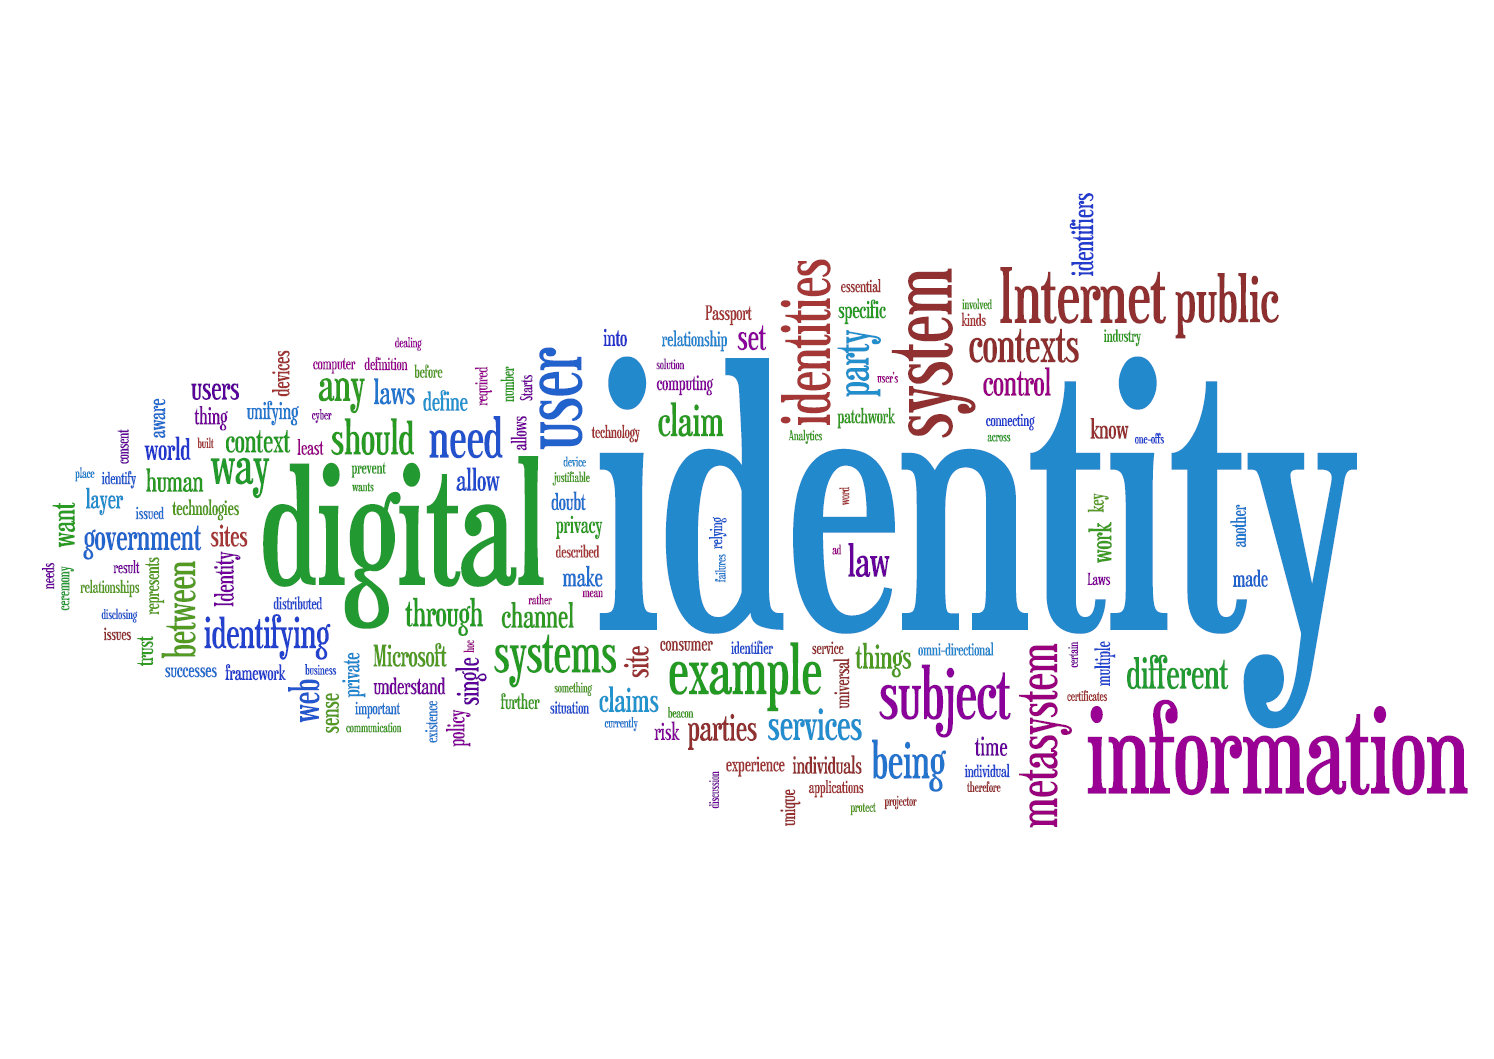 research on online identity